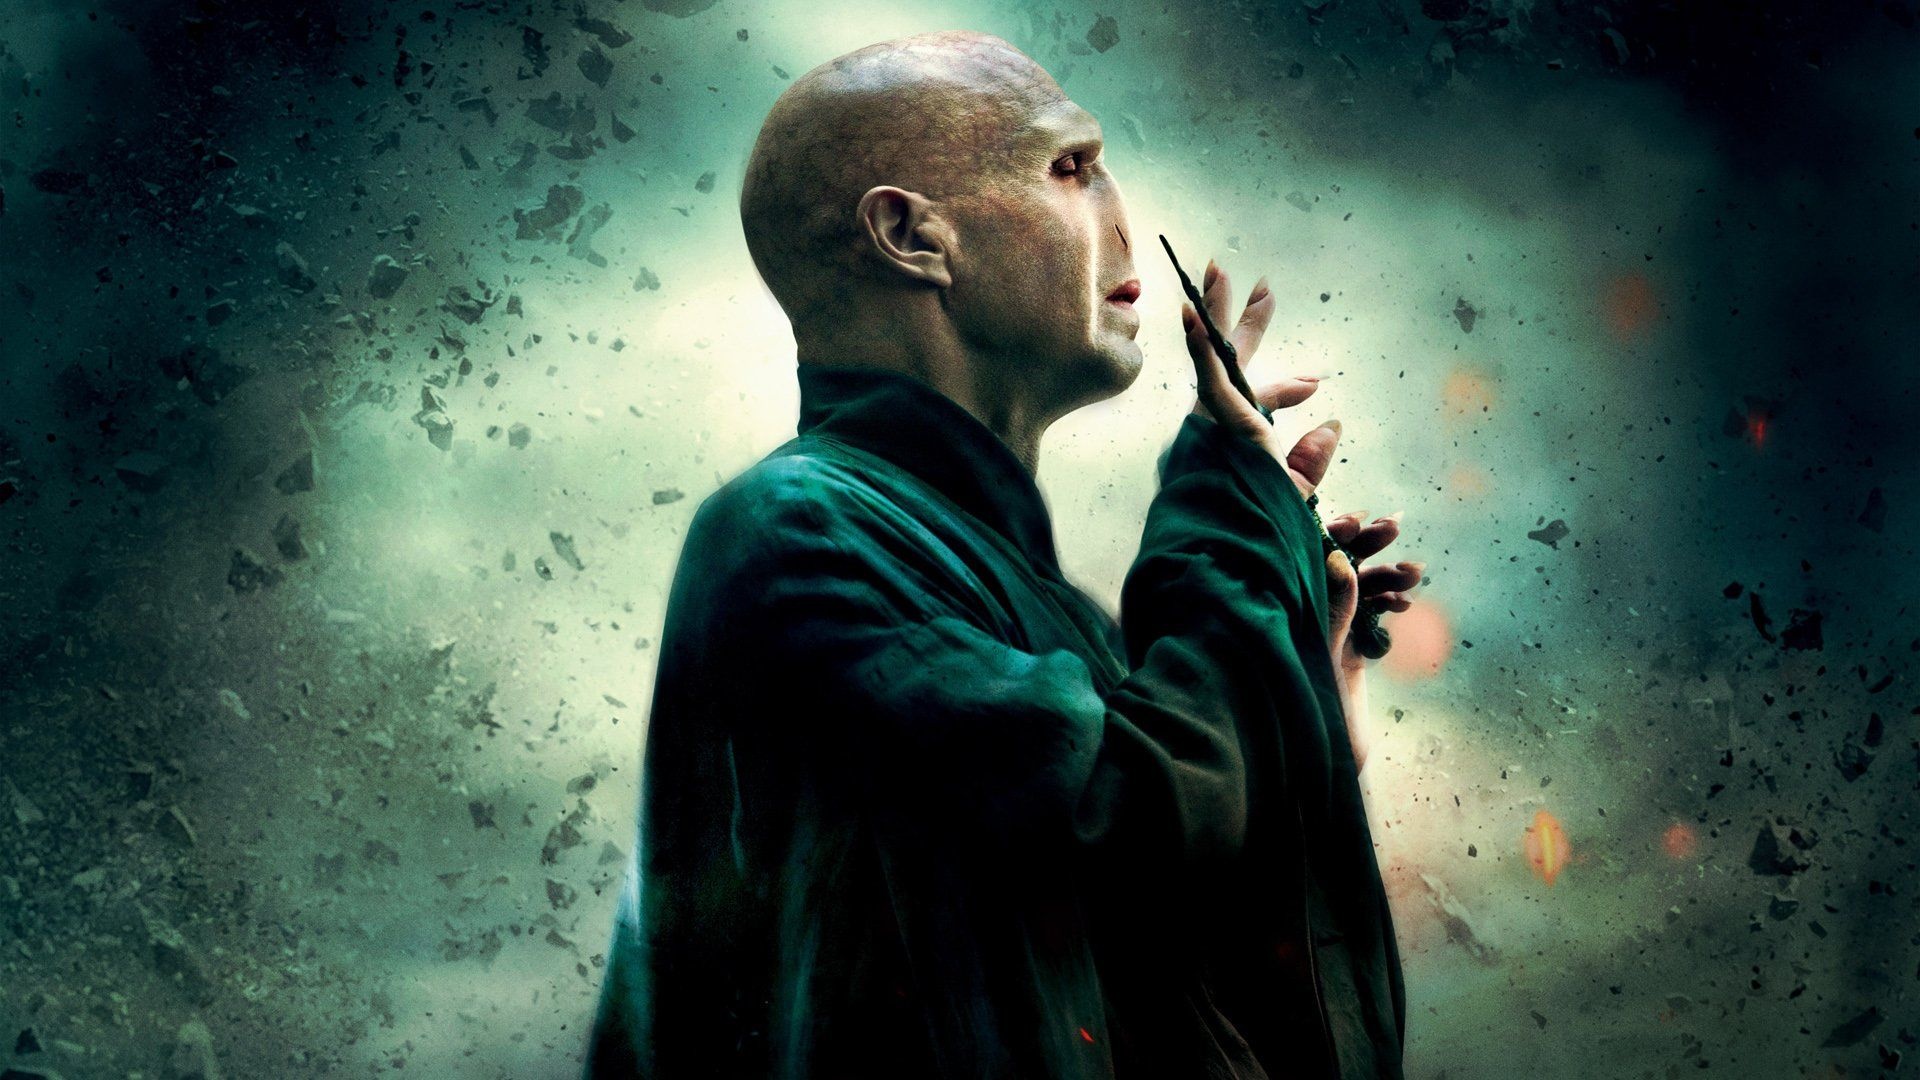 HD wallpaper, Deathly Hallows, The Dark Lord, 1920X1080 Full Hd Desktop, Lord Voldemort, Desktop 1080P The Deathly Hallows Background, Movie Poster